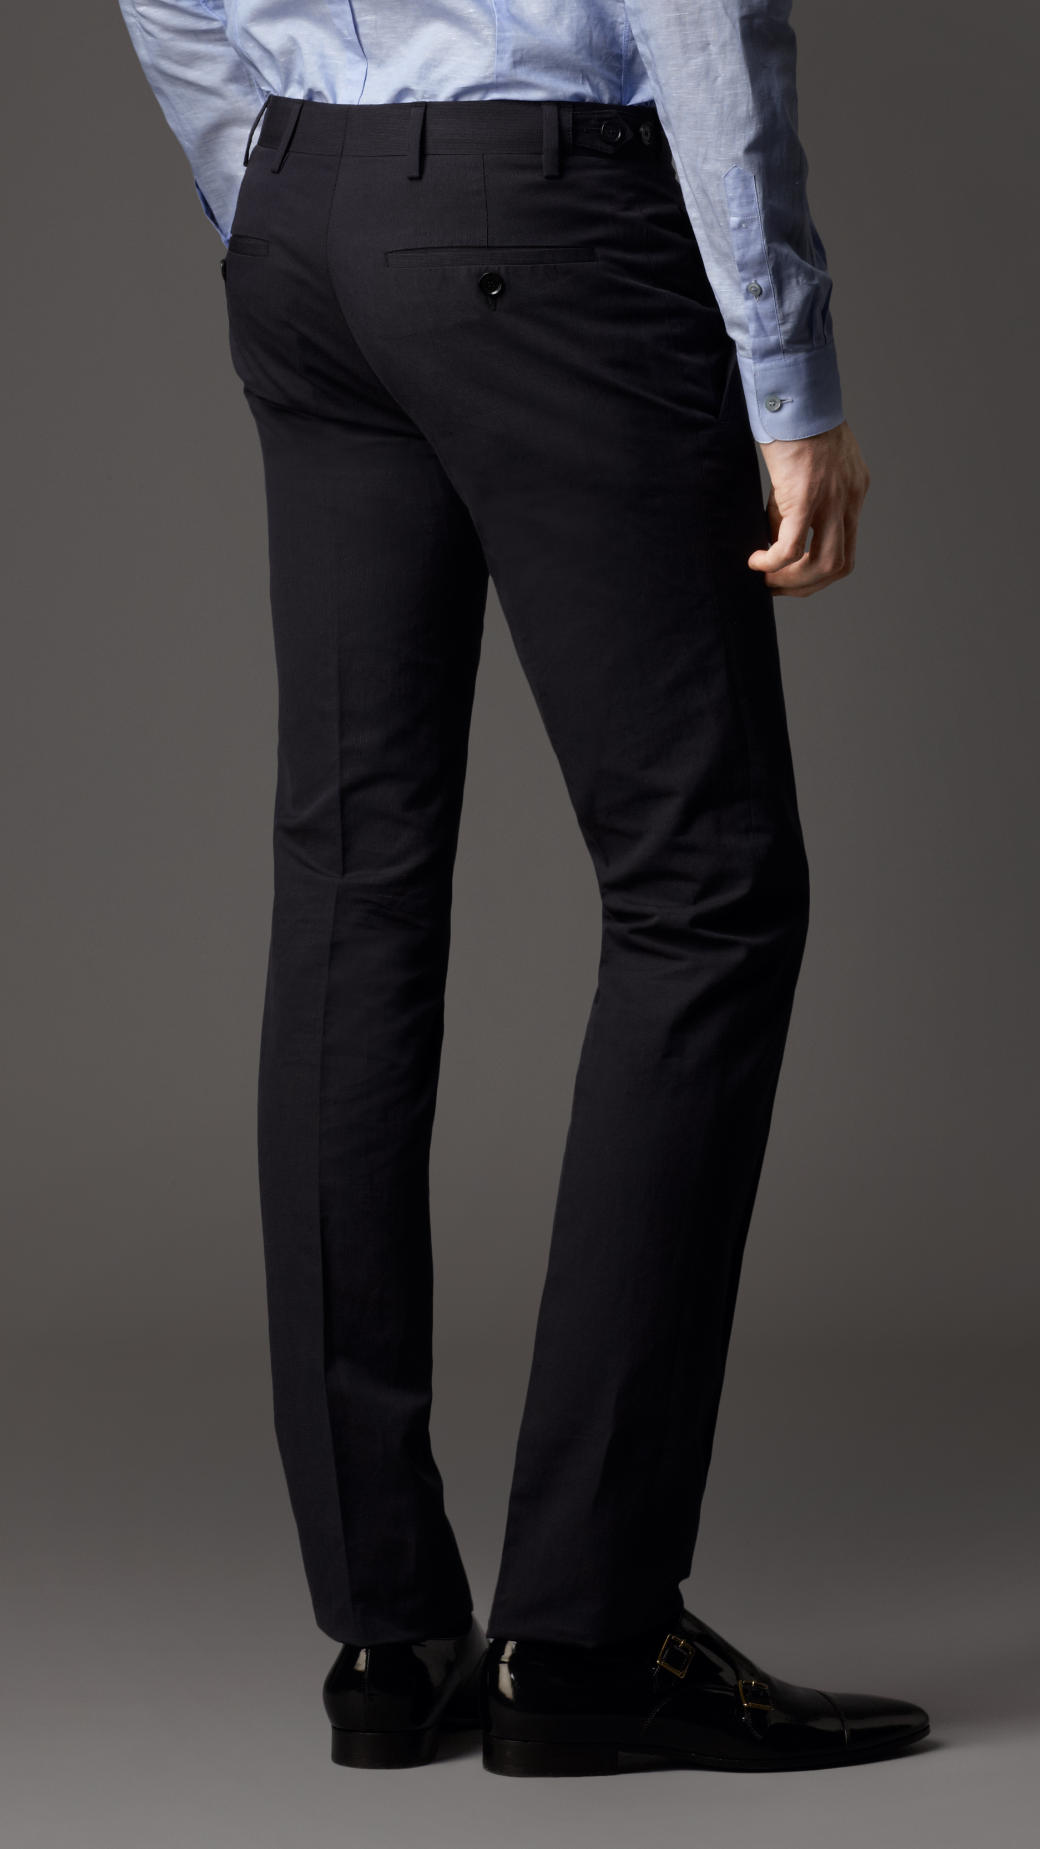 Burberry Slim Fit Cotton Linen Trousers in Navy (Blue) for Men - Lyst